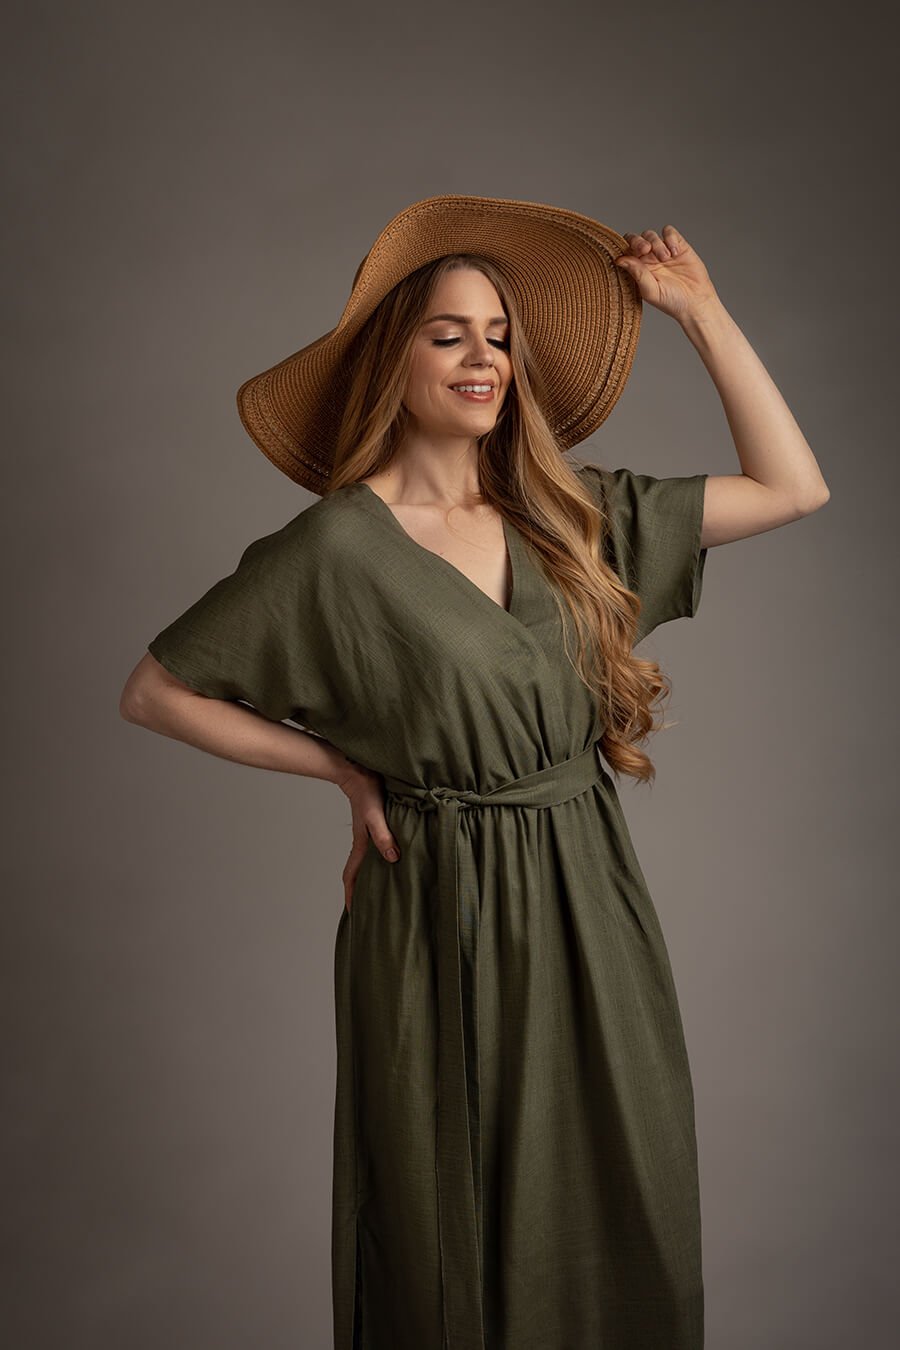 blond model poses in a studio wearing a boho style dress in green color with short sleeves and a split on the skirt. the top features a low v cut neckline. she has a brown hat to match the western boho chic style. 